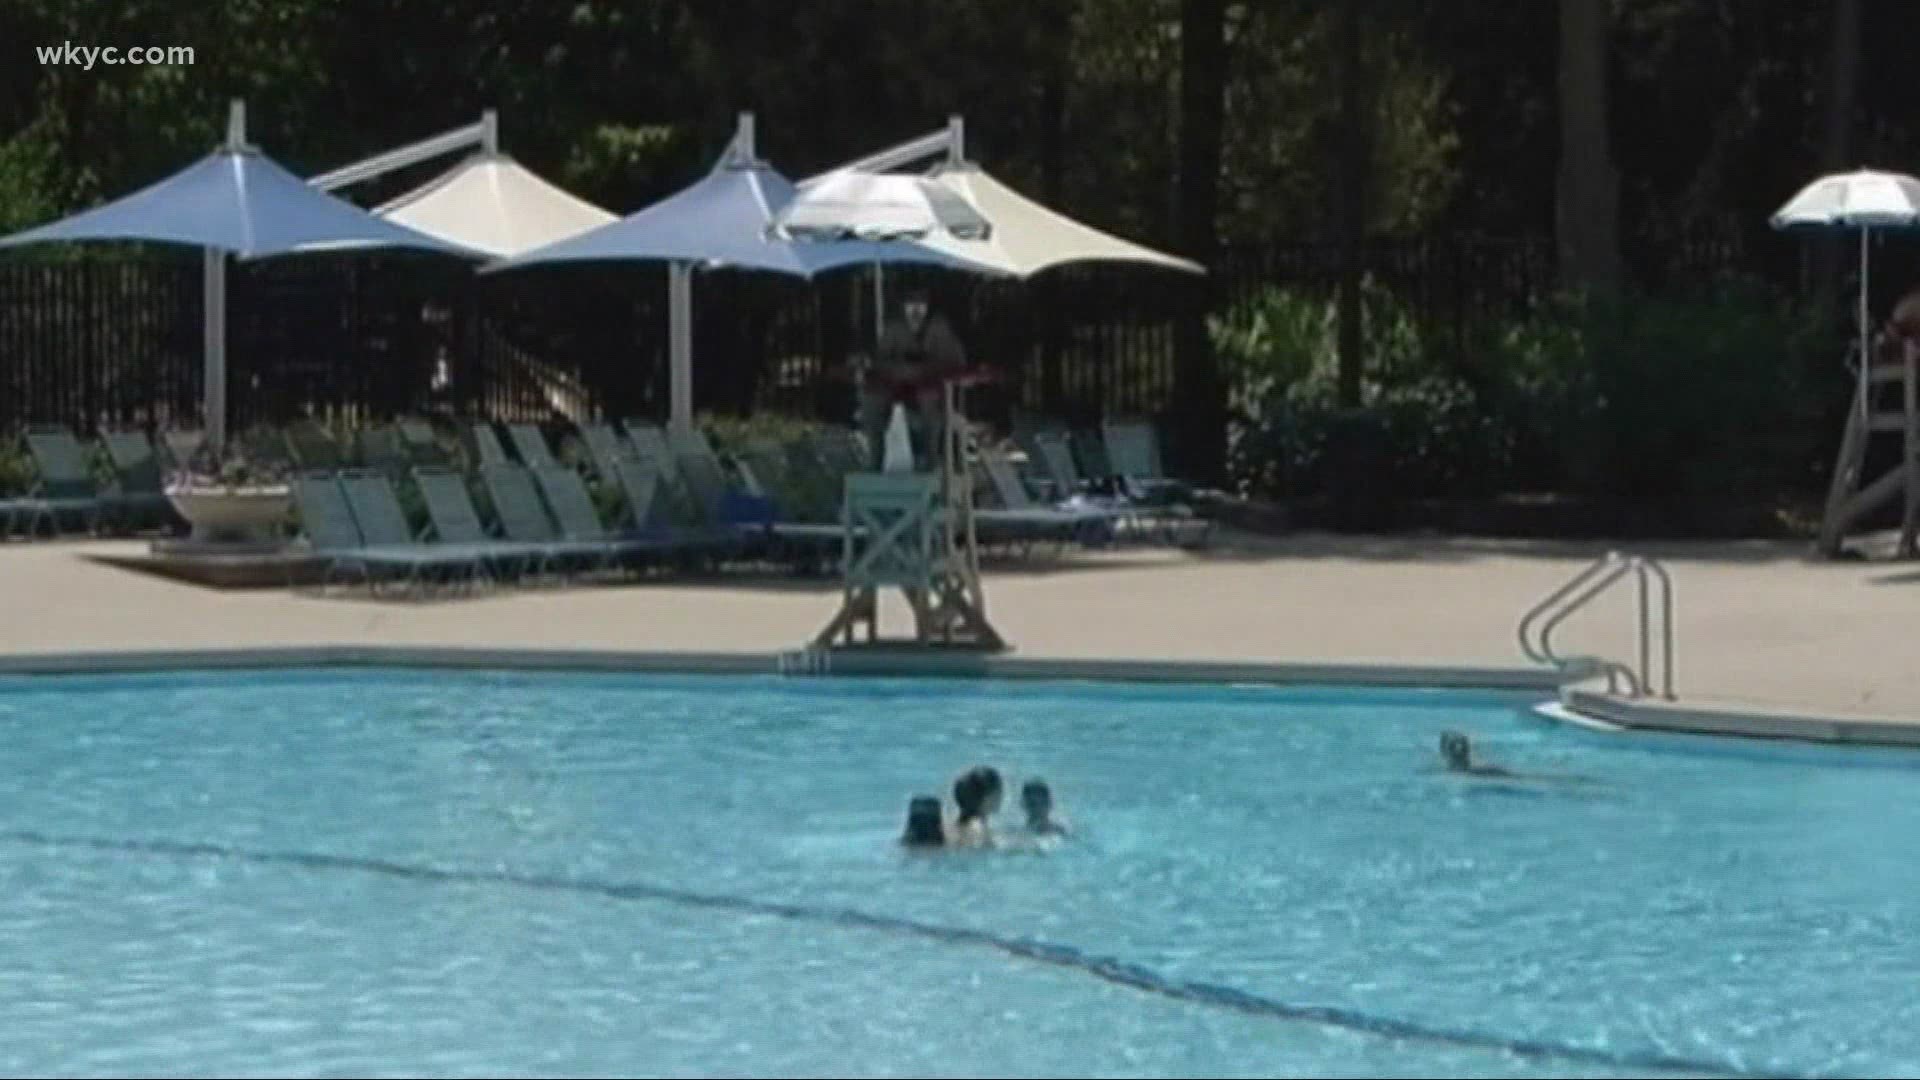 With swimming pools given the green light to open in Ohio, what does that mean for those people concerned about the spread of coronavirus? Here's what experts say.